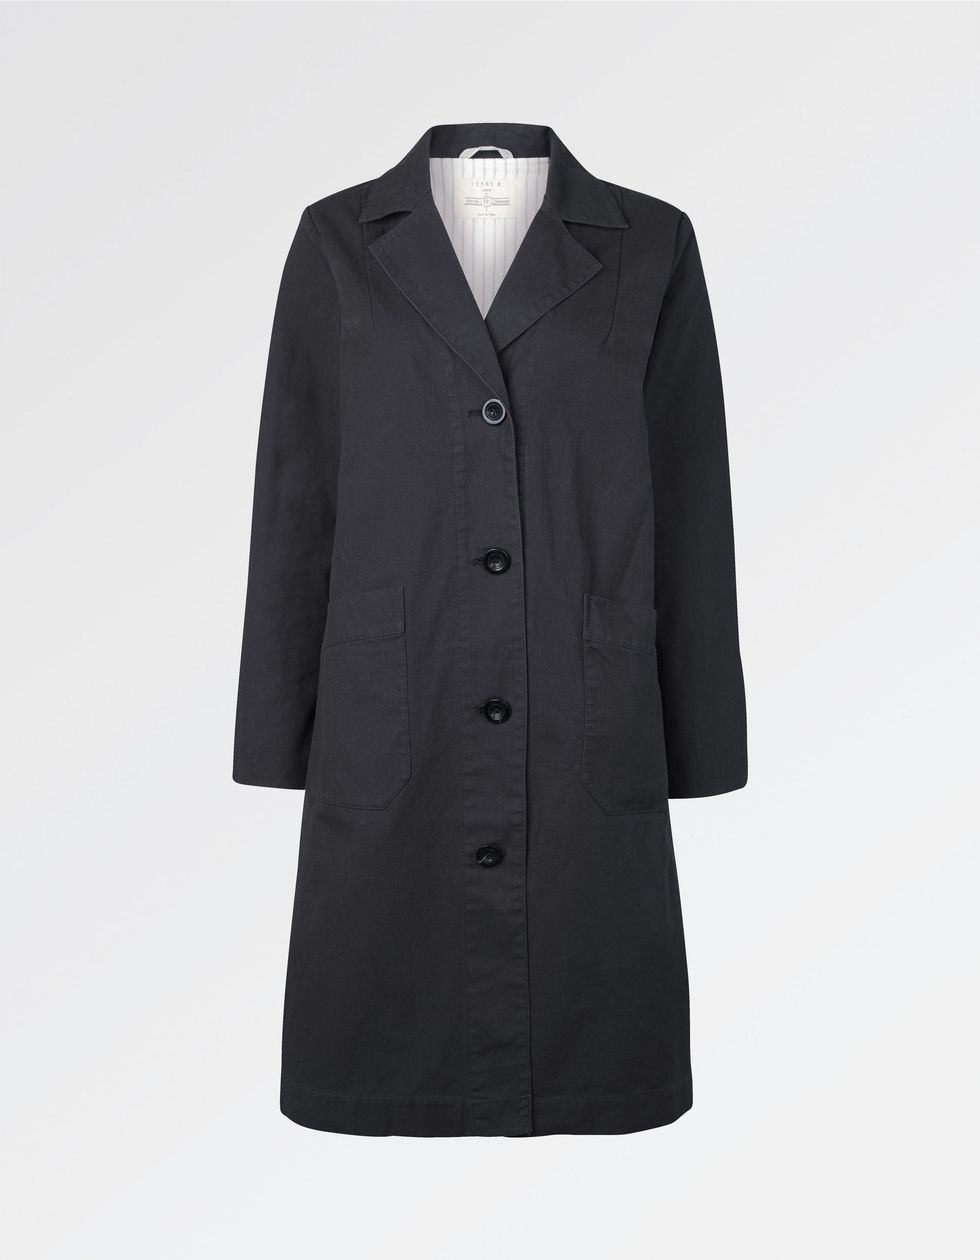 Clothing, Coat, Outerwear, Overcoat, Trench coat, Sleeve, Collar, Jacket, Button, 